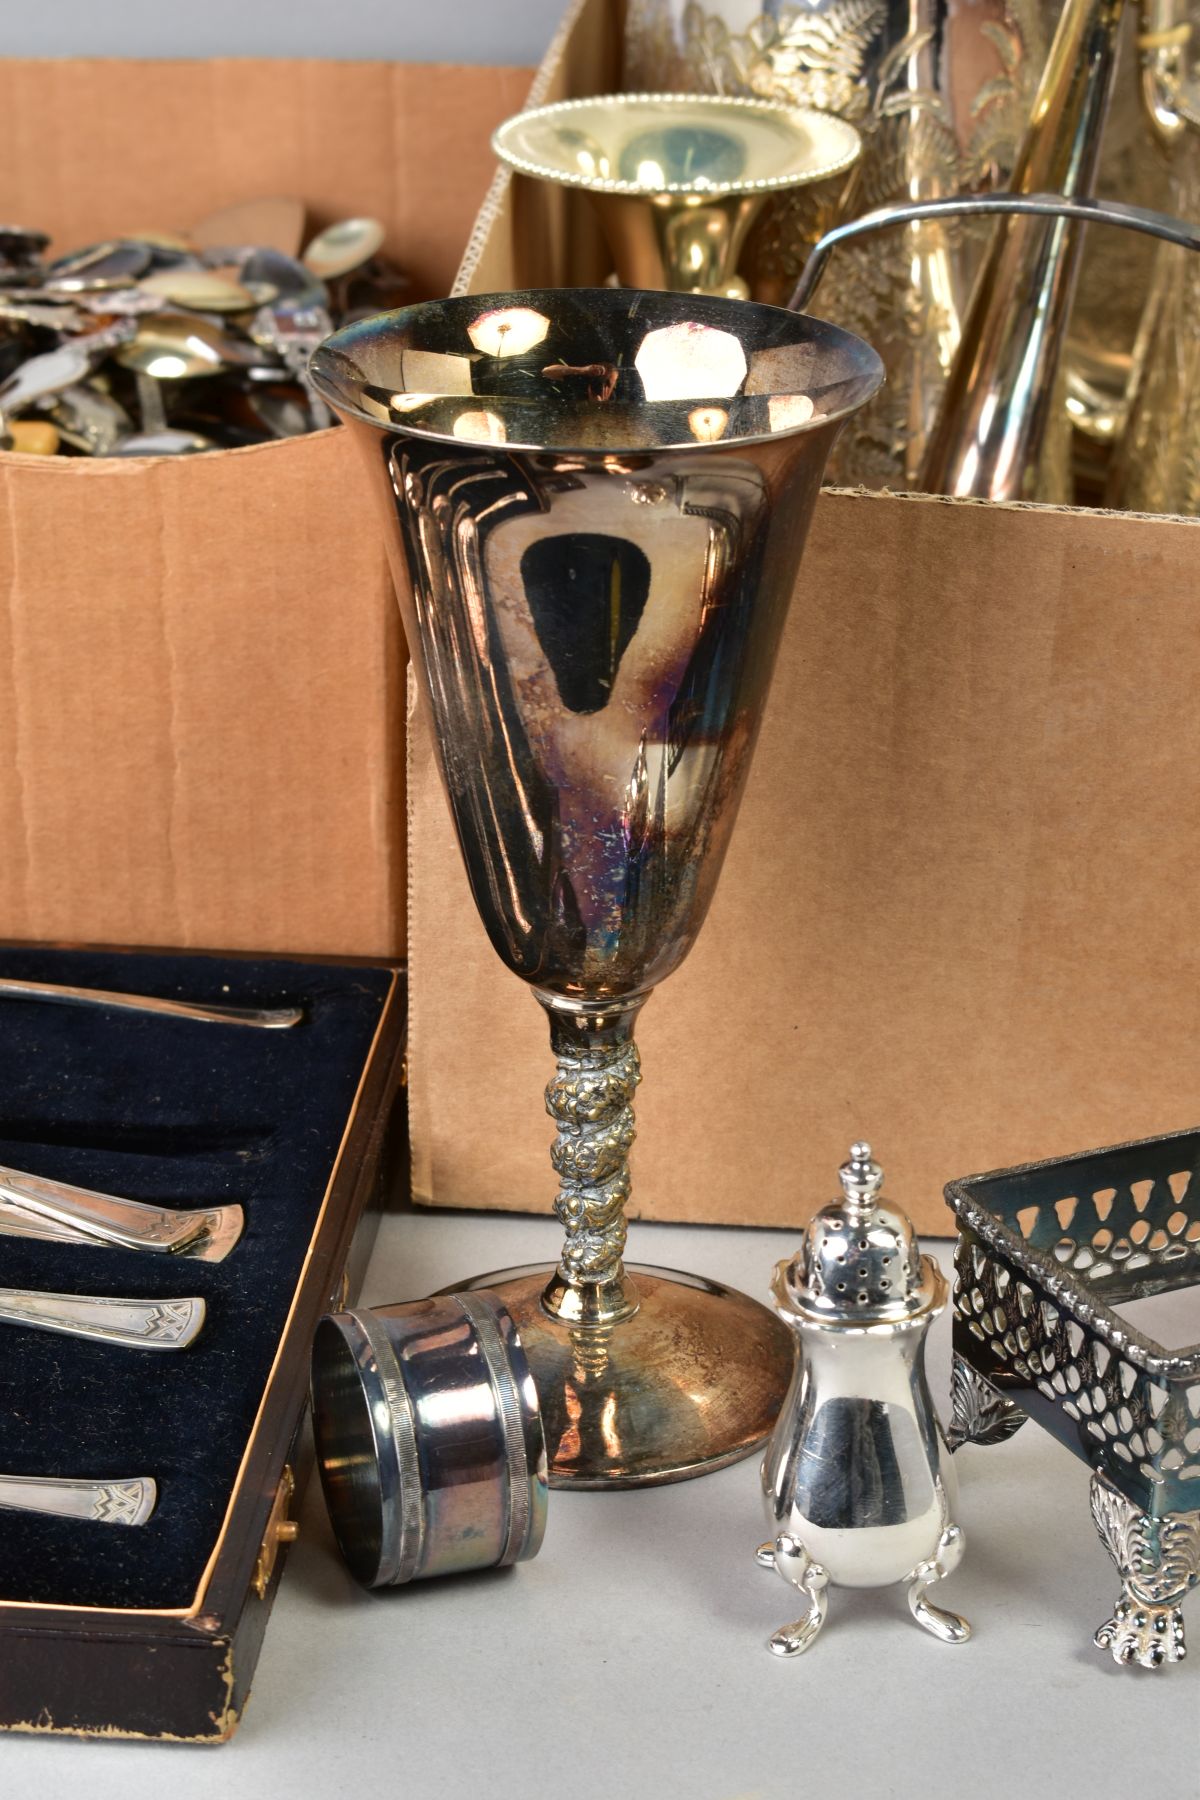 TWO BOXES OF SILVER PLATE, STAINLES STEEL ETC, including souvenir spoons, a small silver handled - Image 2 of 7